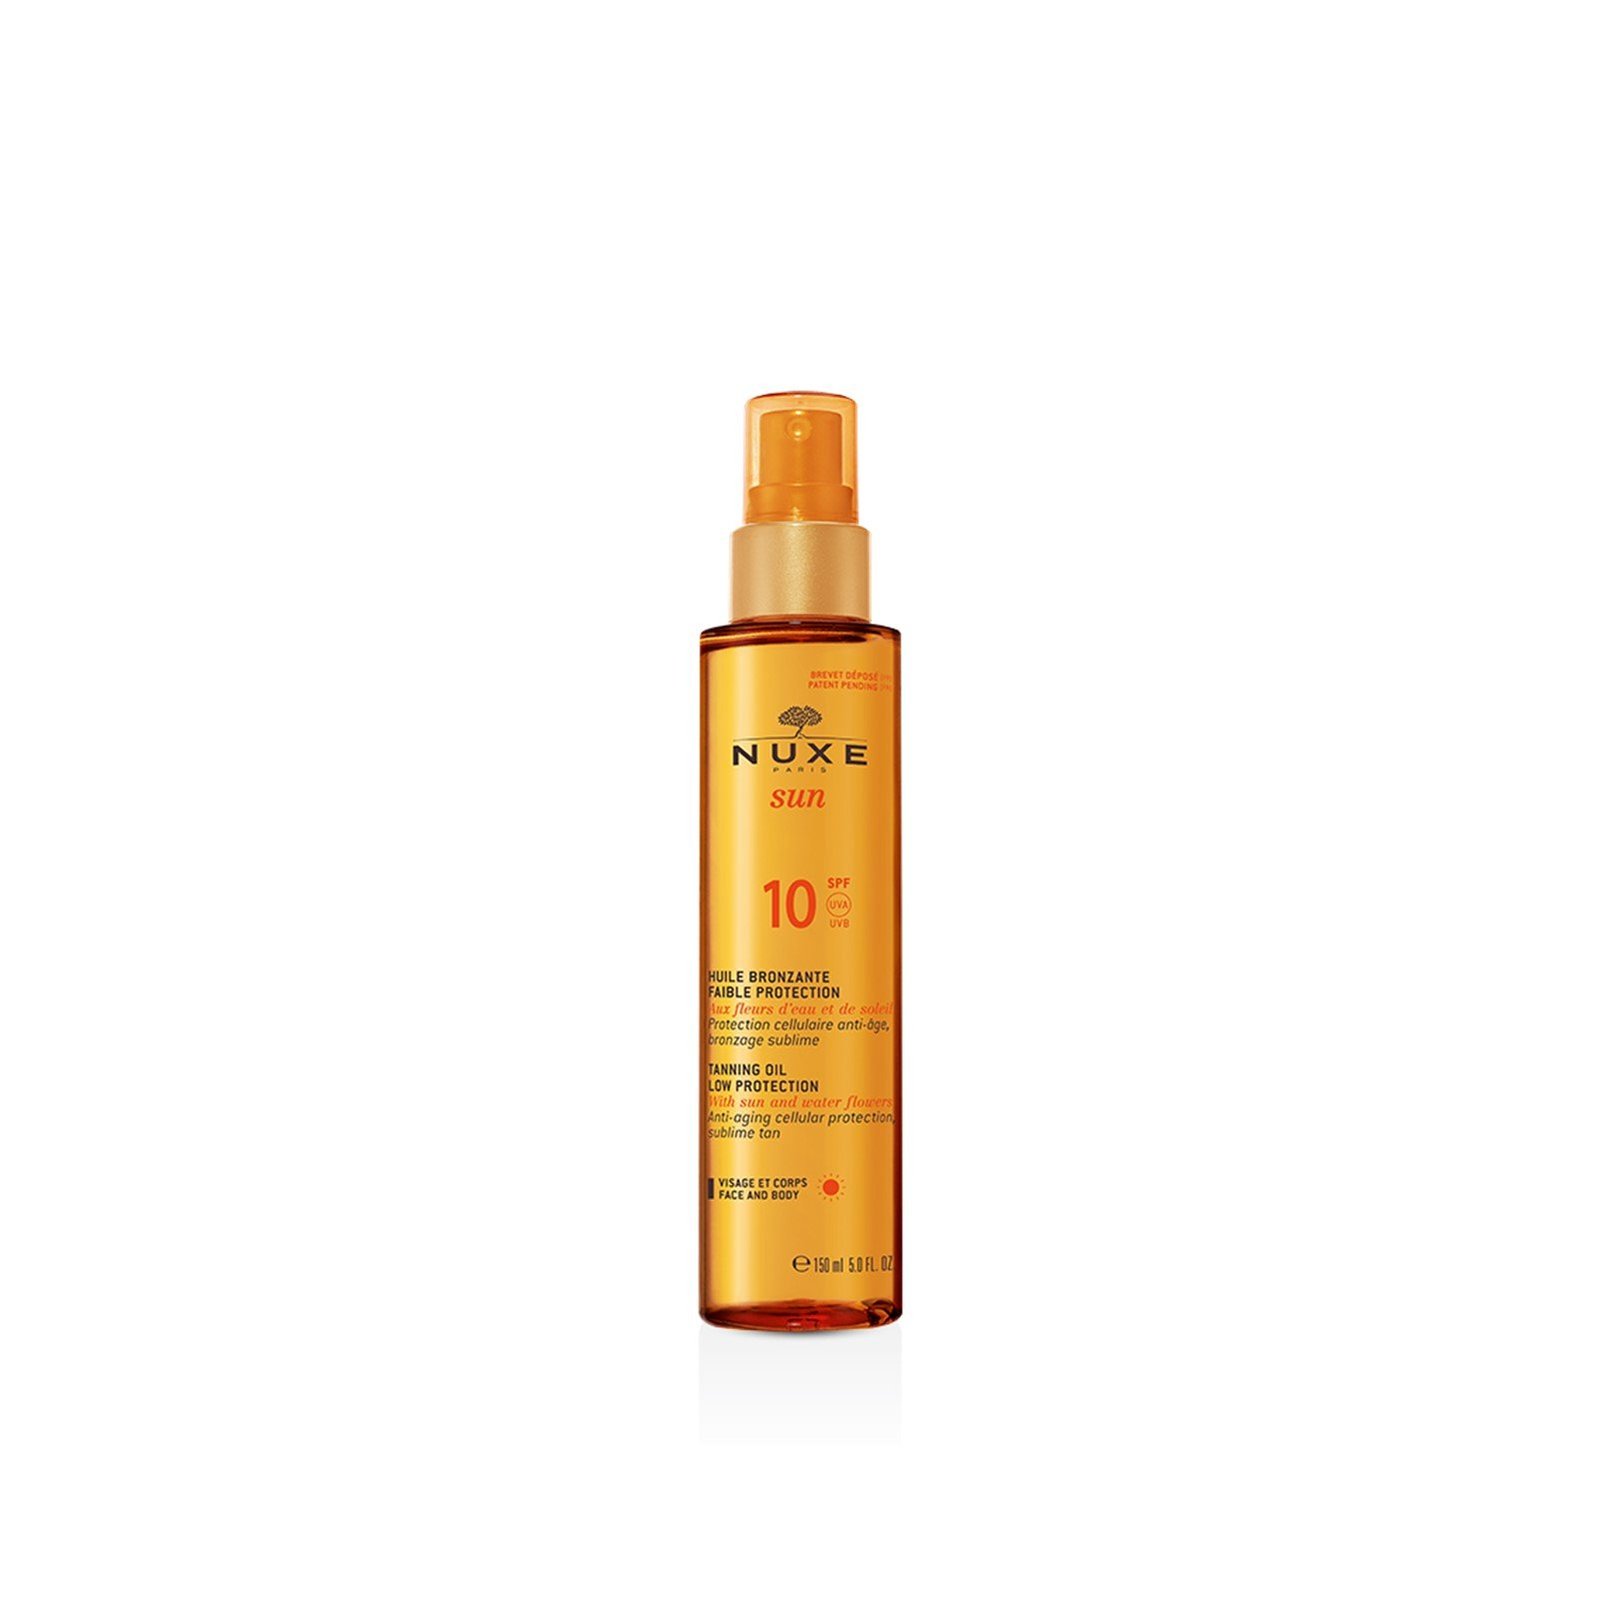 NUXE Sun Tanning Oil Low Protection for Face and Body SPF10 150ml (5.07fl oz)